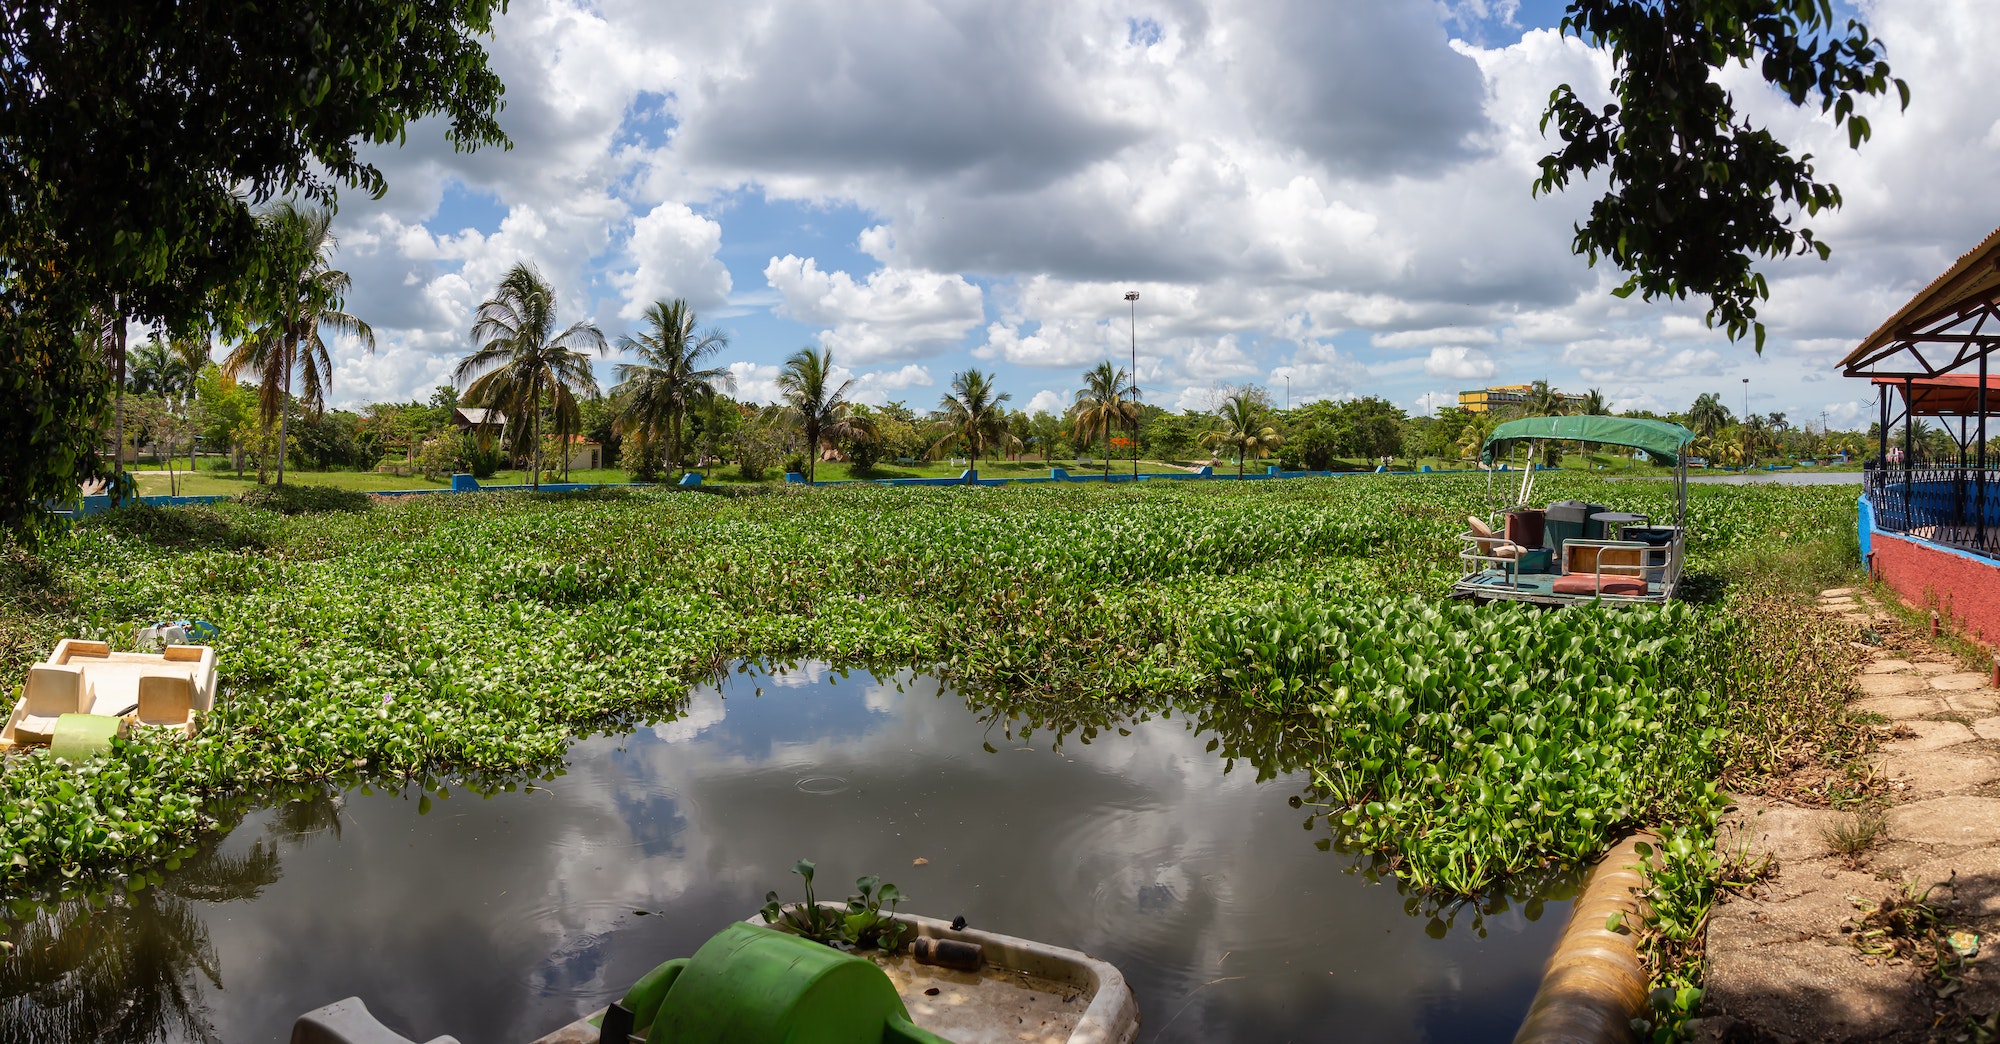 Ciego de Avila, Central Cuba. Panoramic View of a lake at a Park in a small Cuban Town